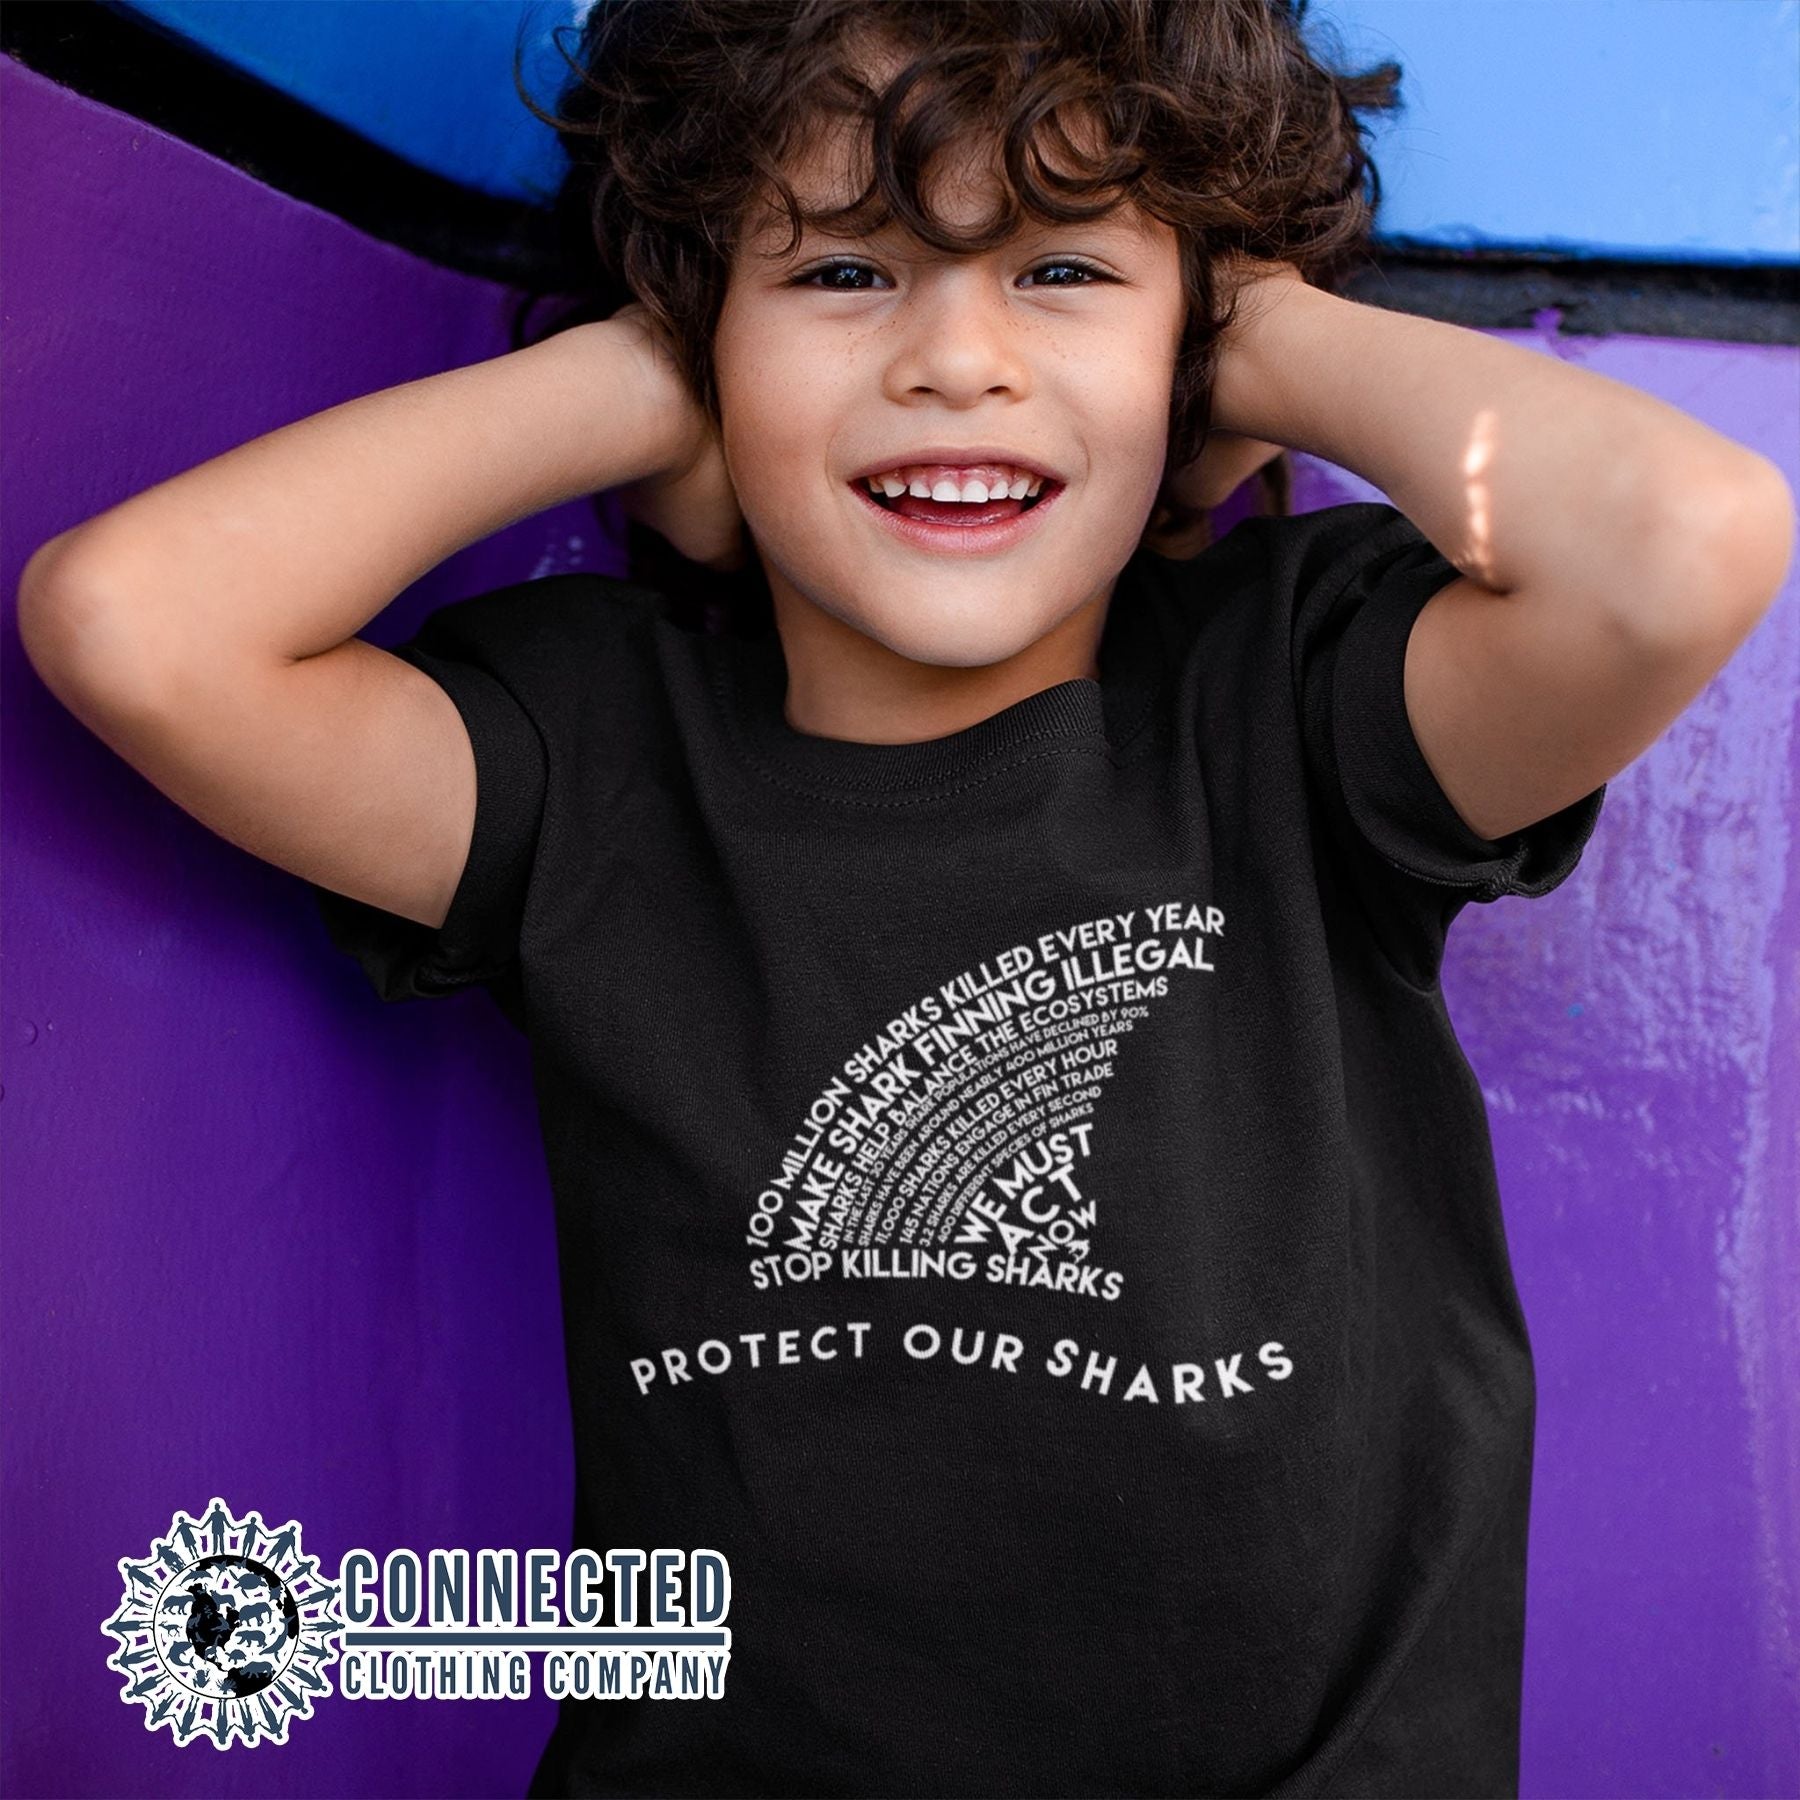 Kid Wearing Black Protect Our Sharks Youth Short-Sleeve Tee - Connected Clothing Company - 10% of profits donated to Oceana ocean conservation